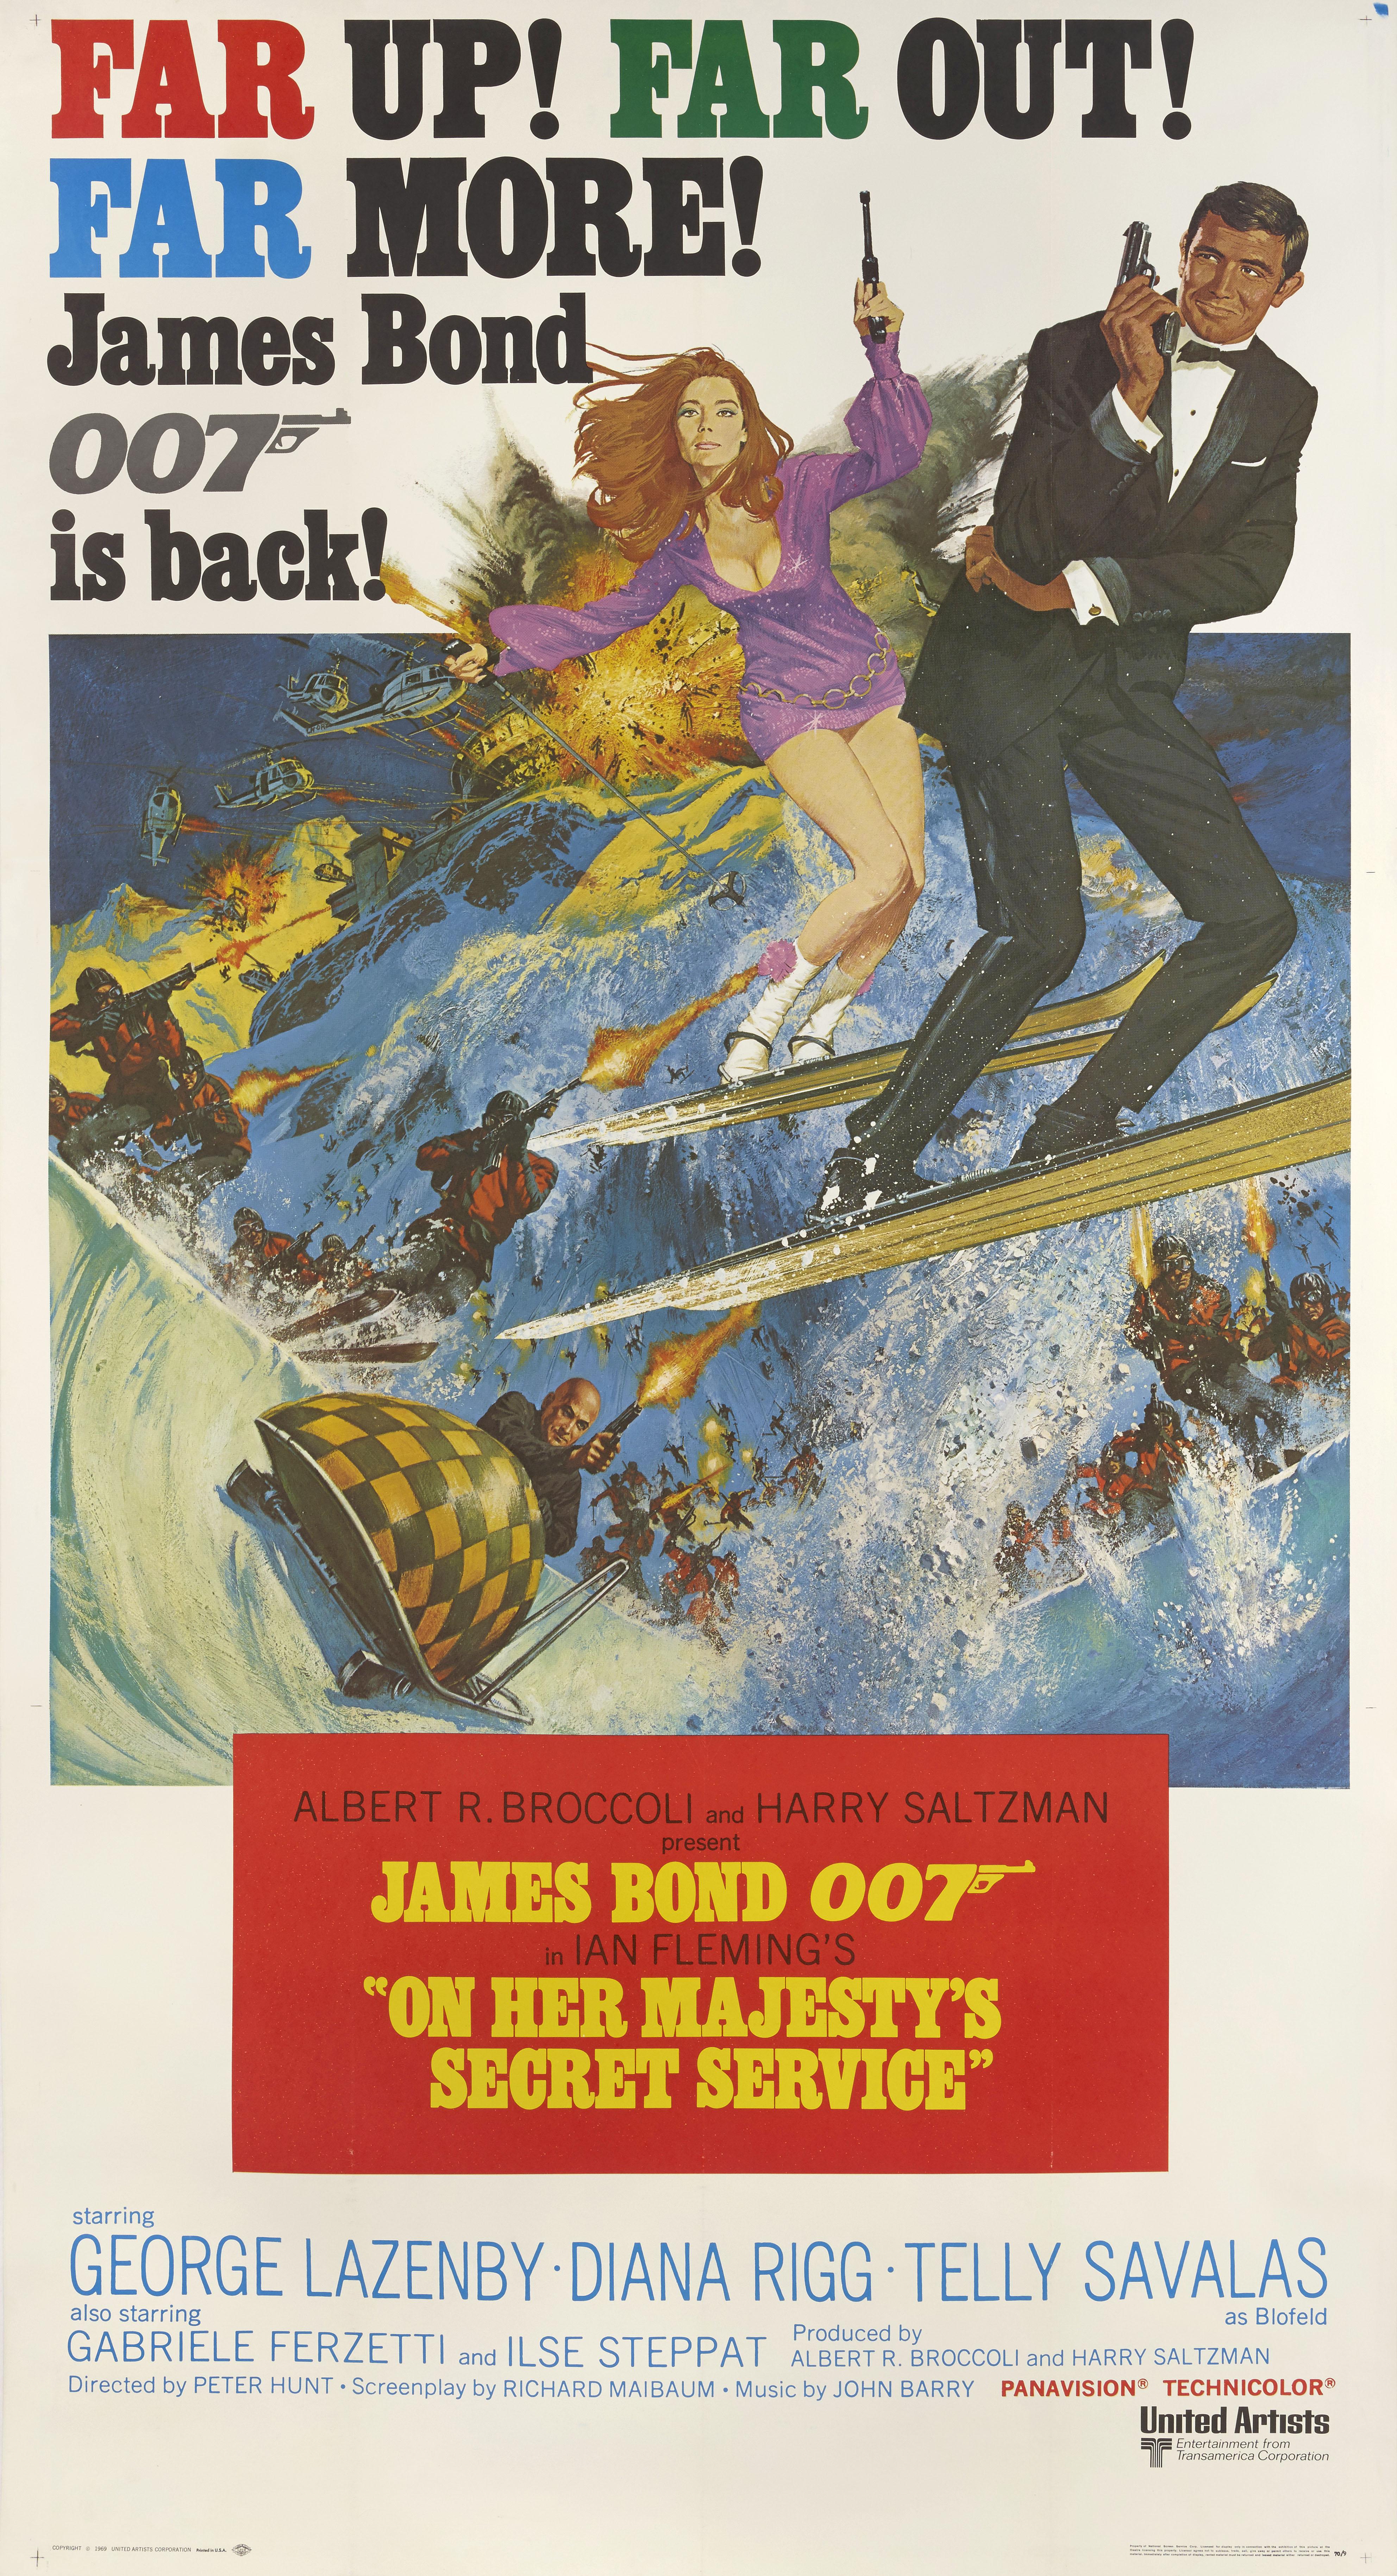 Original US film poster for the sixth in the James Bond series, and stars George Lazenby as 007, a role that he would only play this one time. This poster was printed in 2 sheets and designed to be passed up on billboards. This poster is Linen